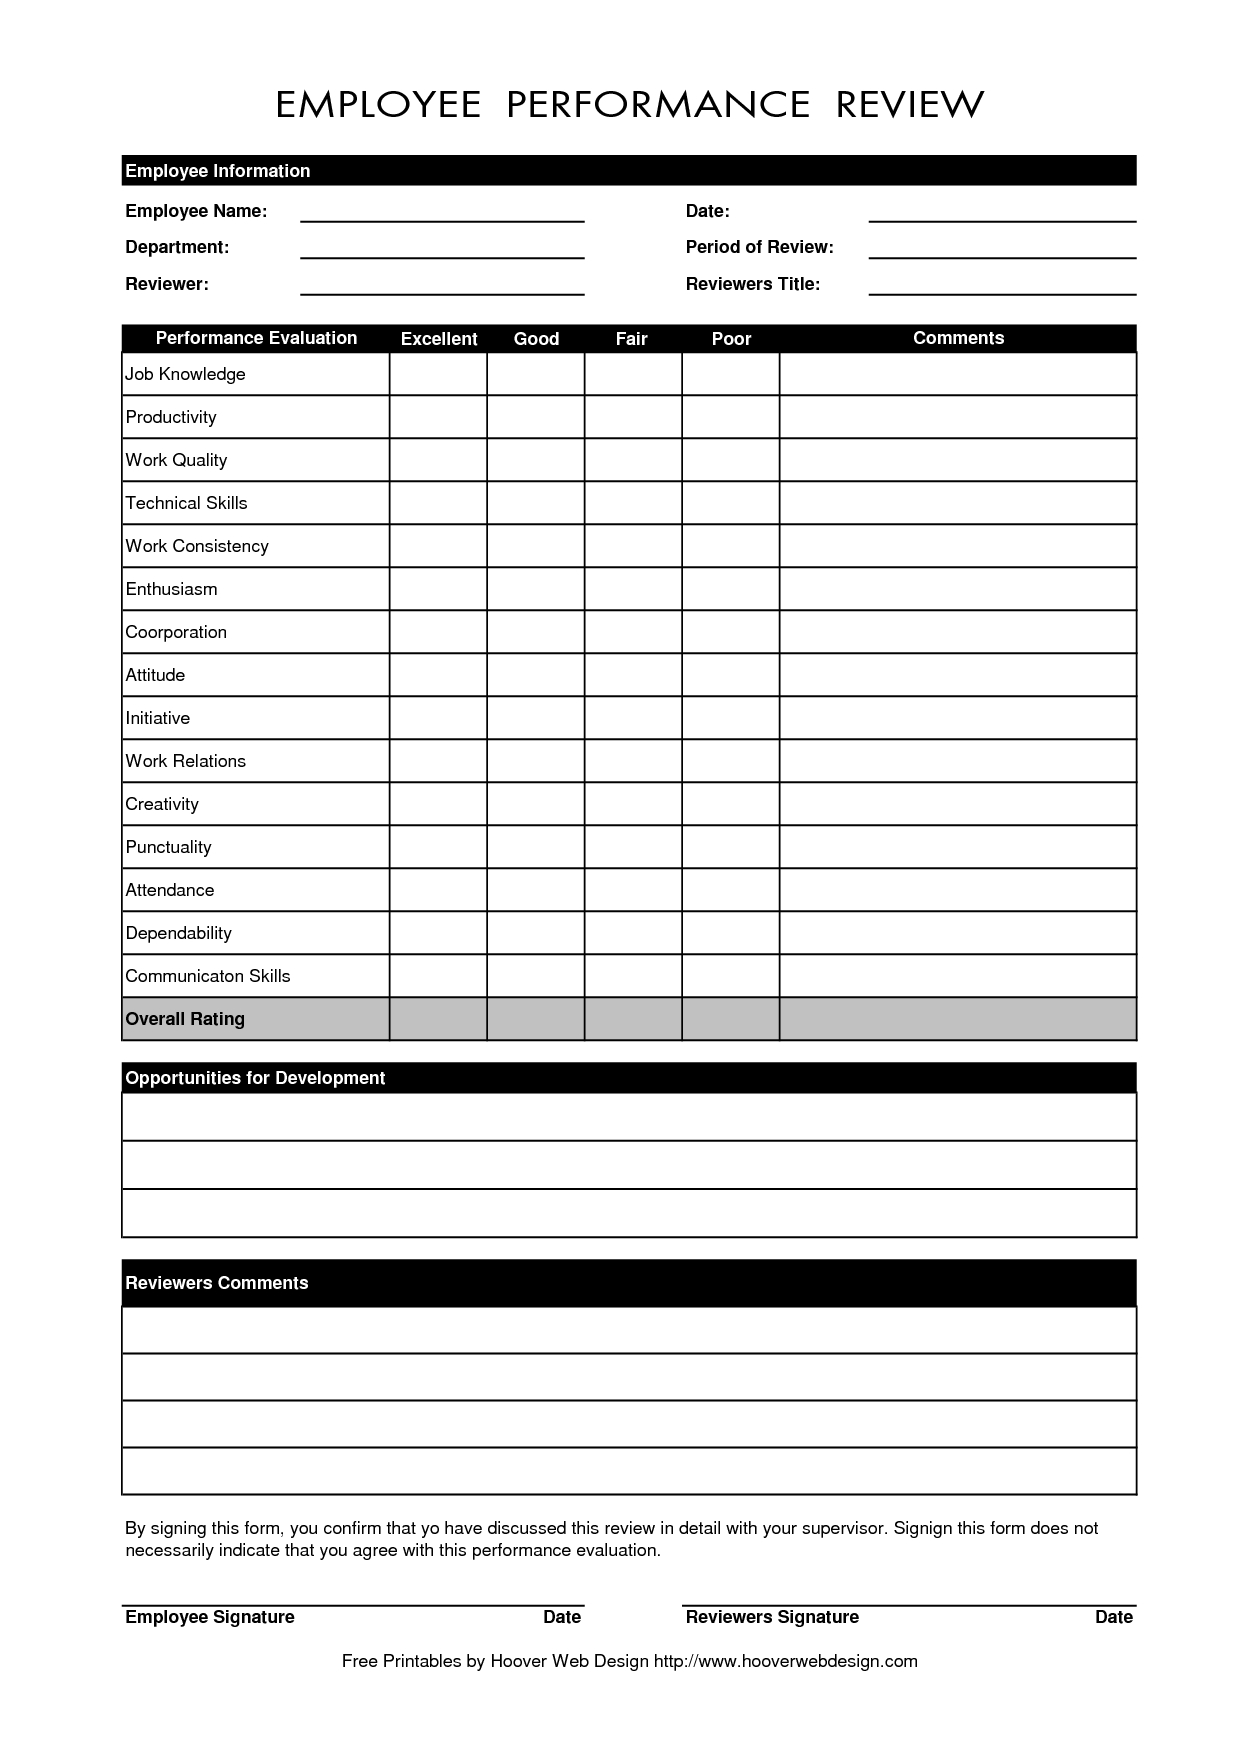 Free Employee Performance Review Forms | Employee Regarding Blank Evaluation Form Template